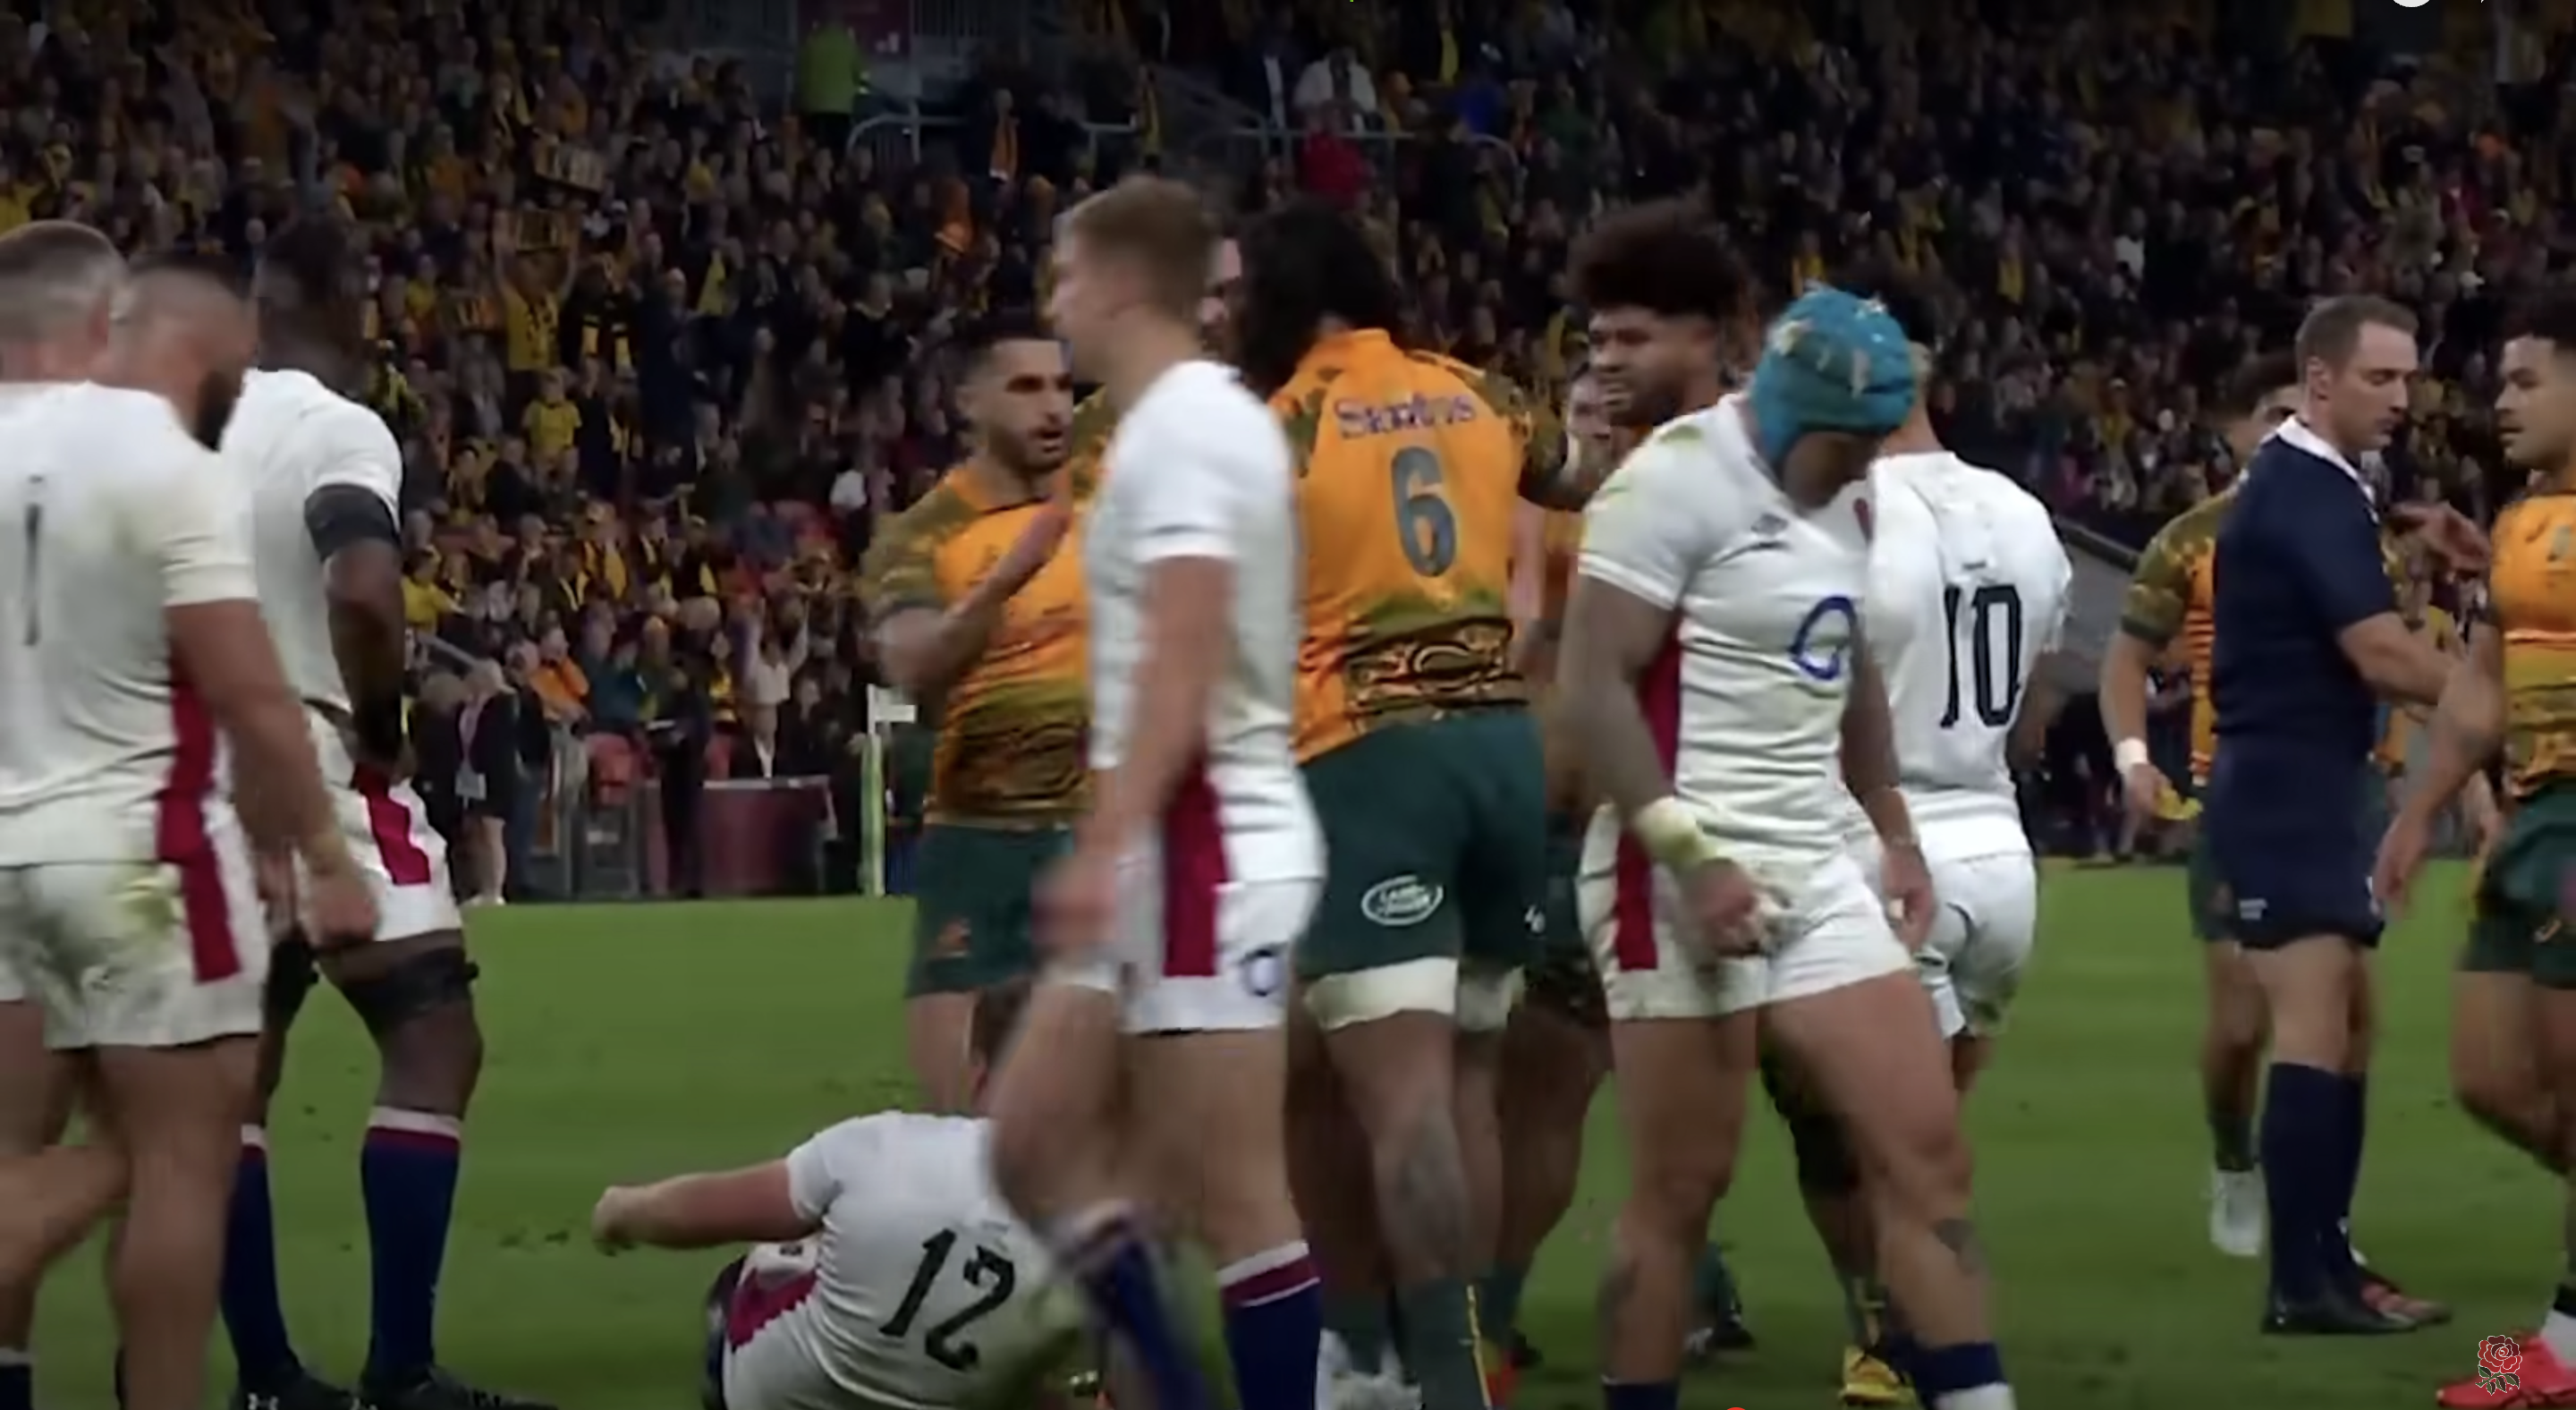 The Wallaby England simply could not handle all series